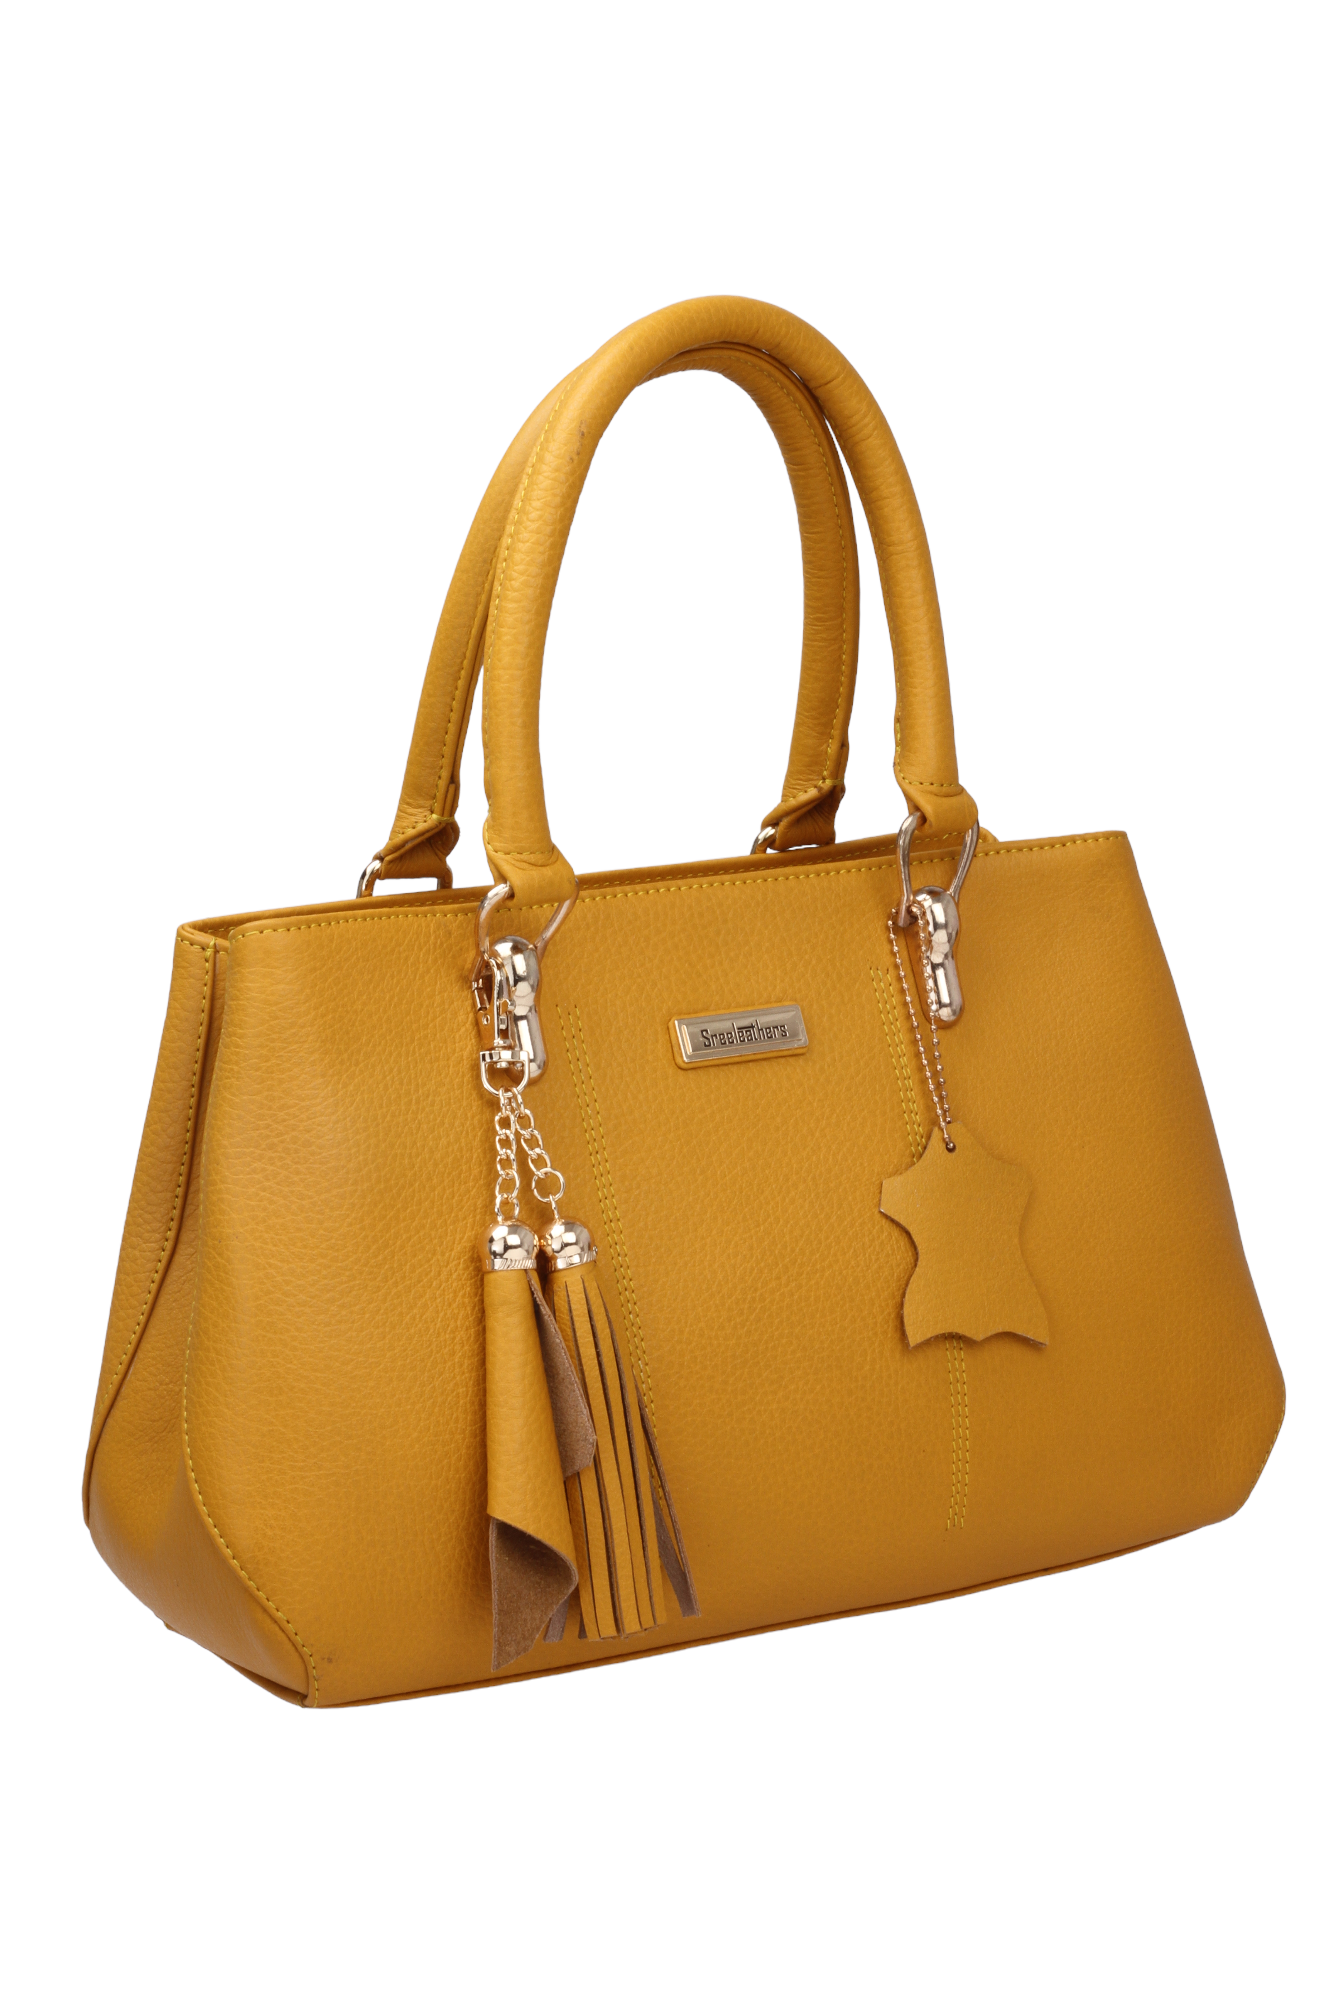 NON BRAND Pu Leather Fancy Ladies Hand Bag, For Casual Wear at Rs 400/piece  in Delhi